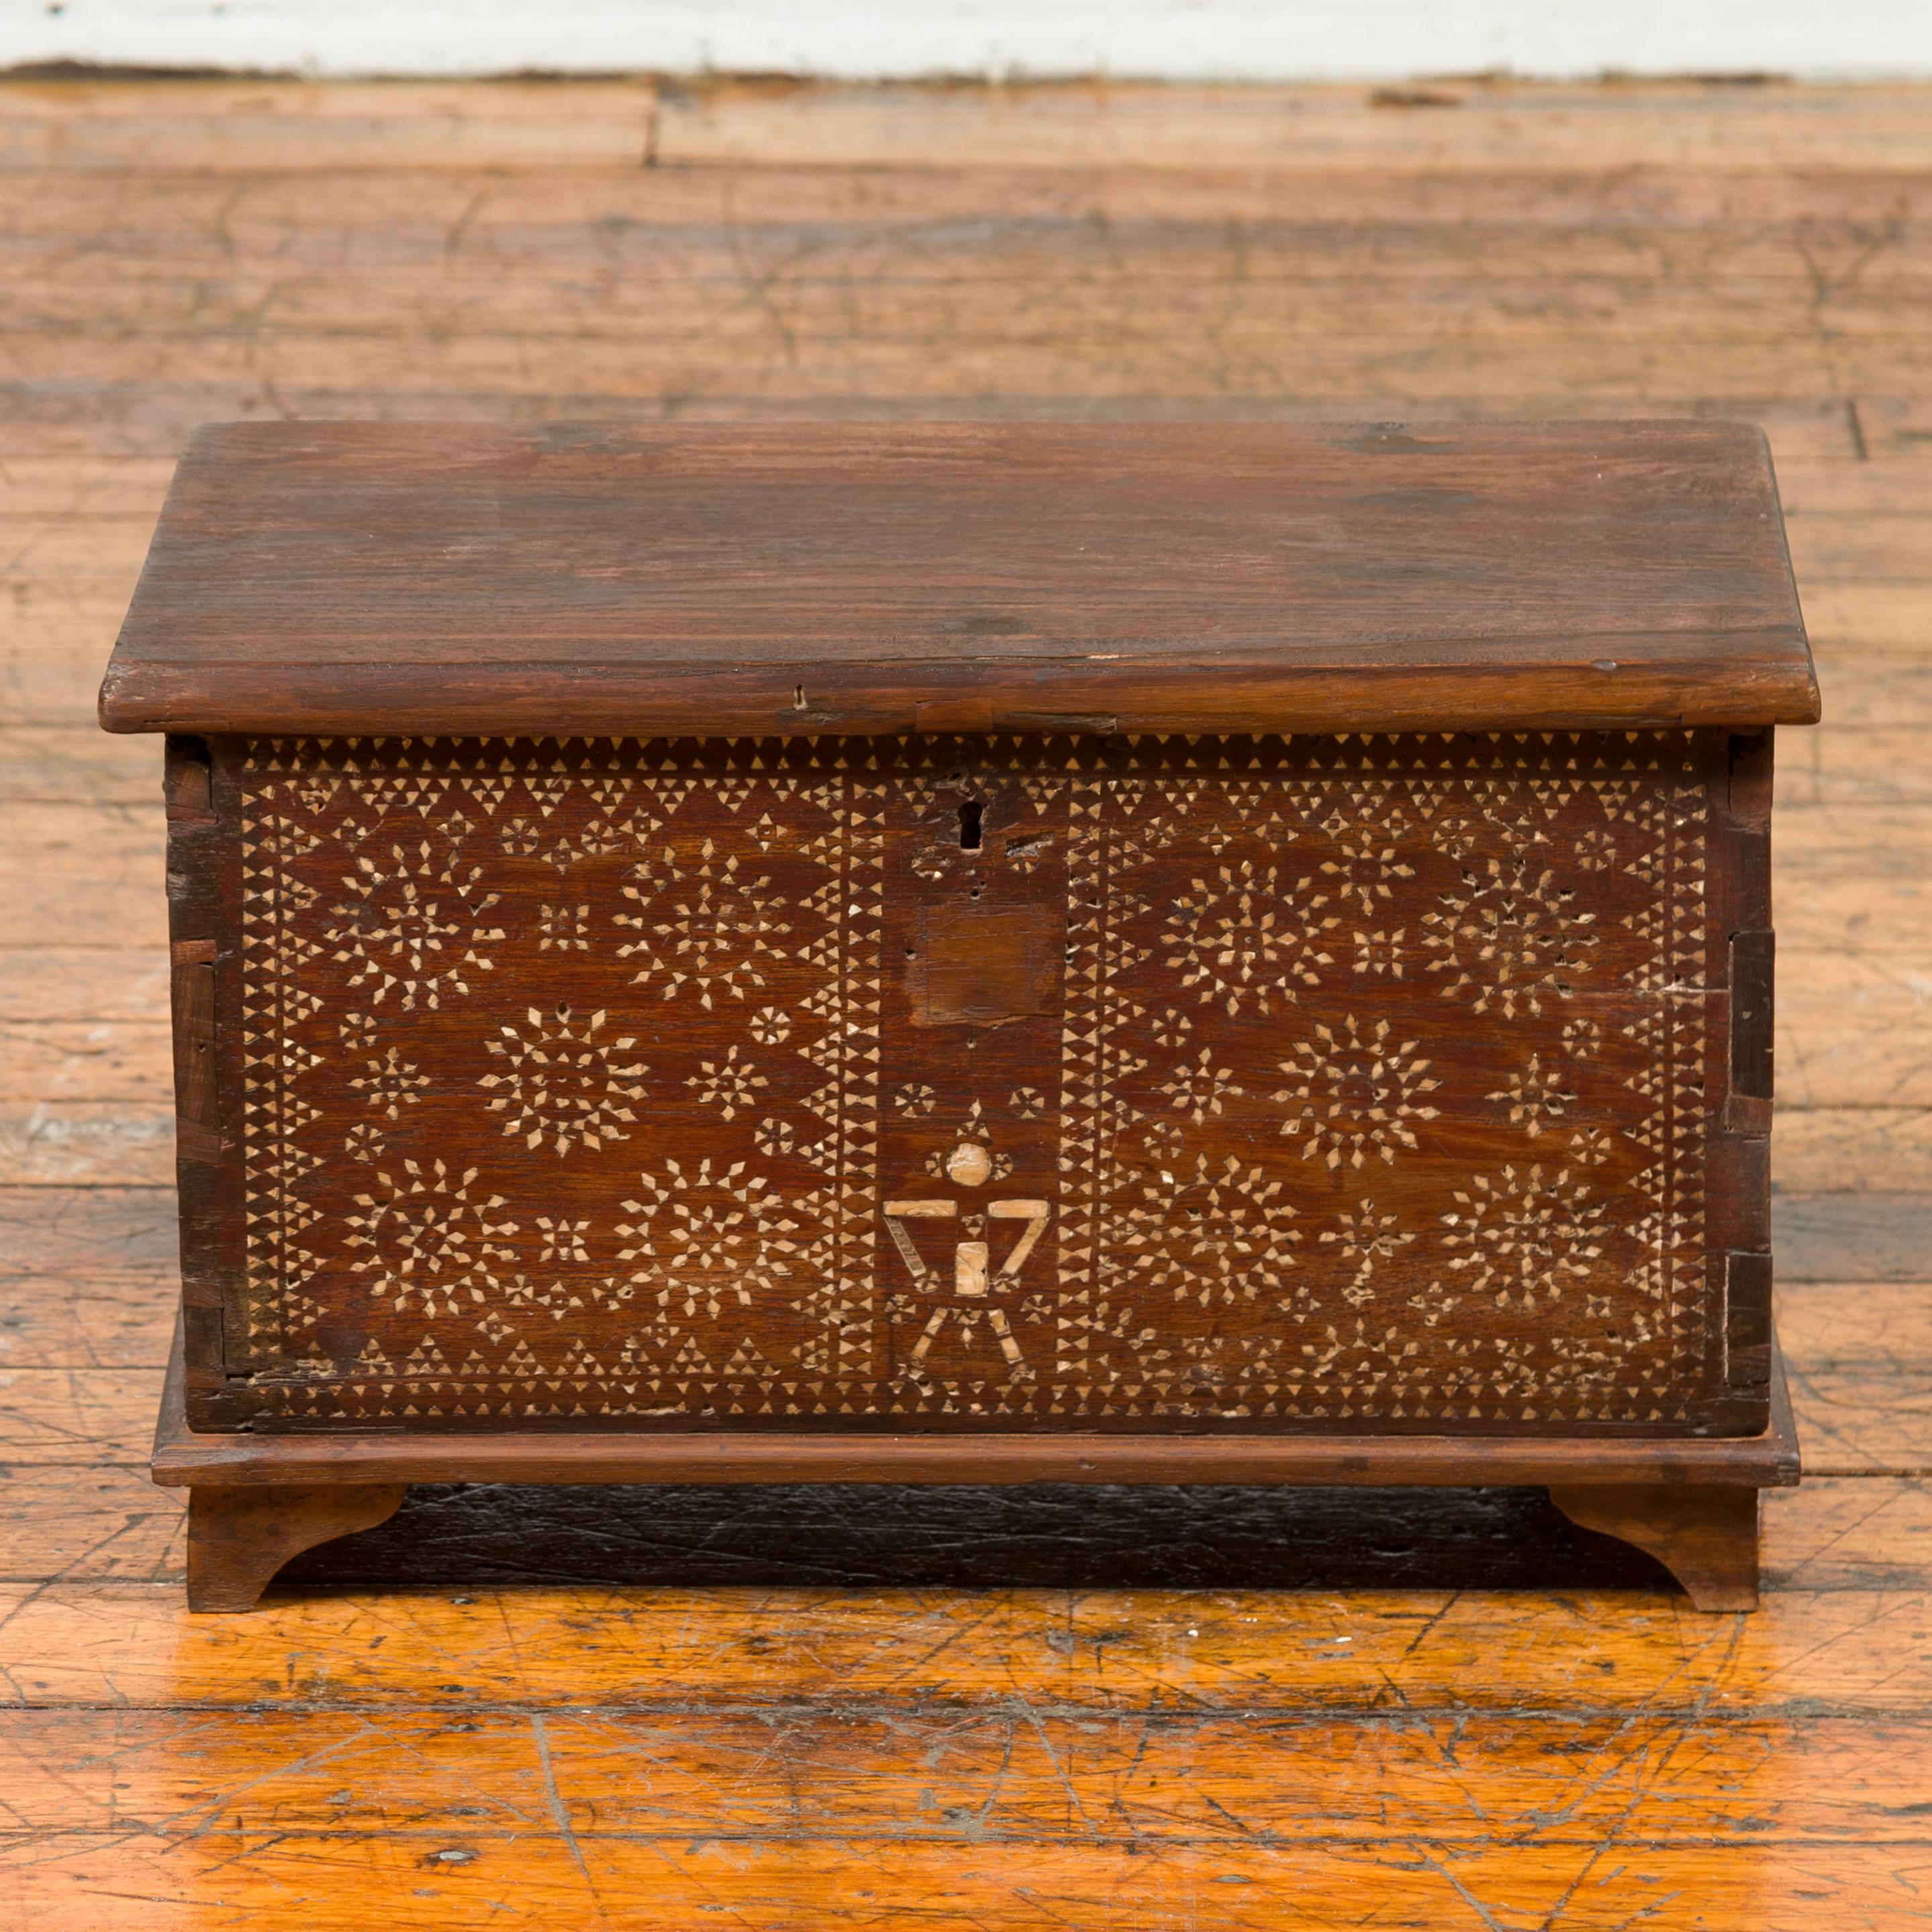 An antique Indonesian blanket chest from Madura, with geometric mother of pearl inlay. Born on the island of Madura off of the northeastern coast of Java, this exquisite blanket chest attracts our attention with its skillfully inlaid mother of pearl